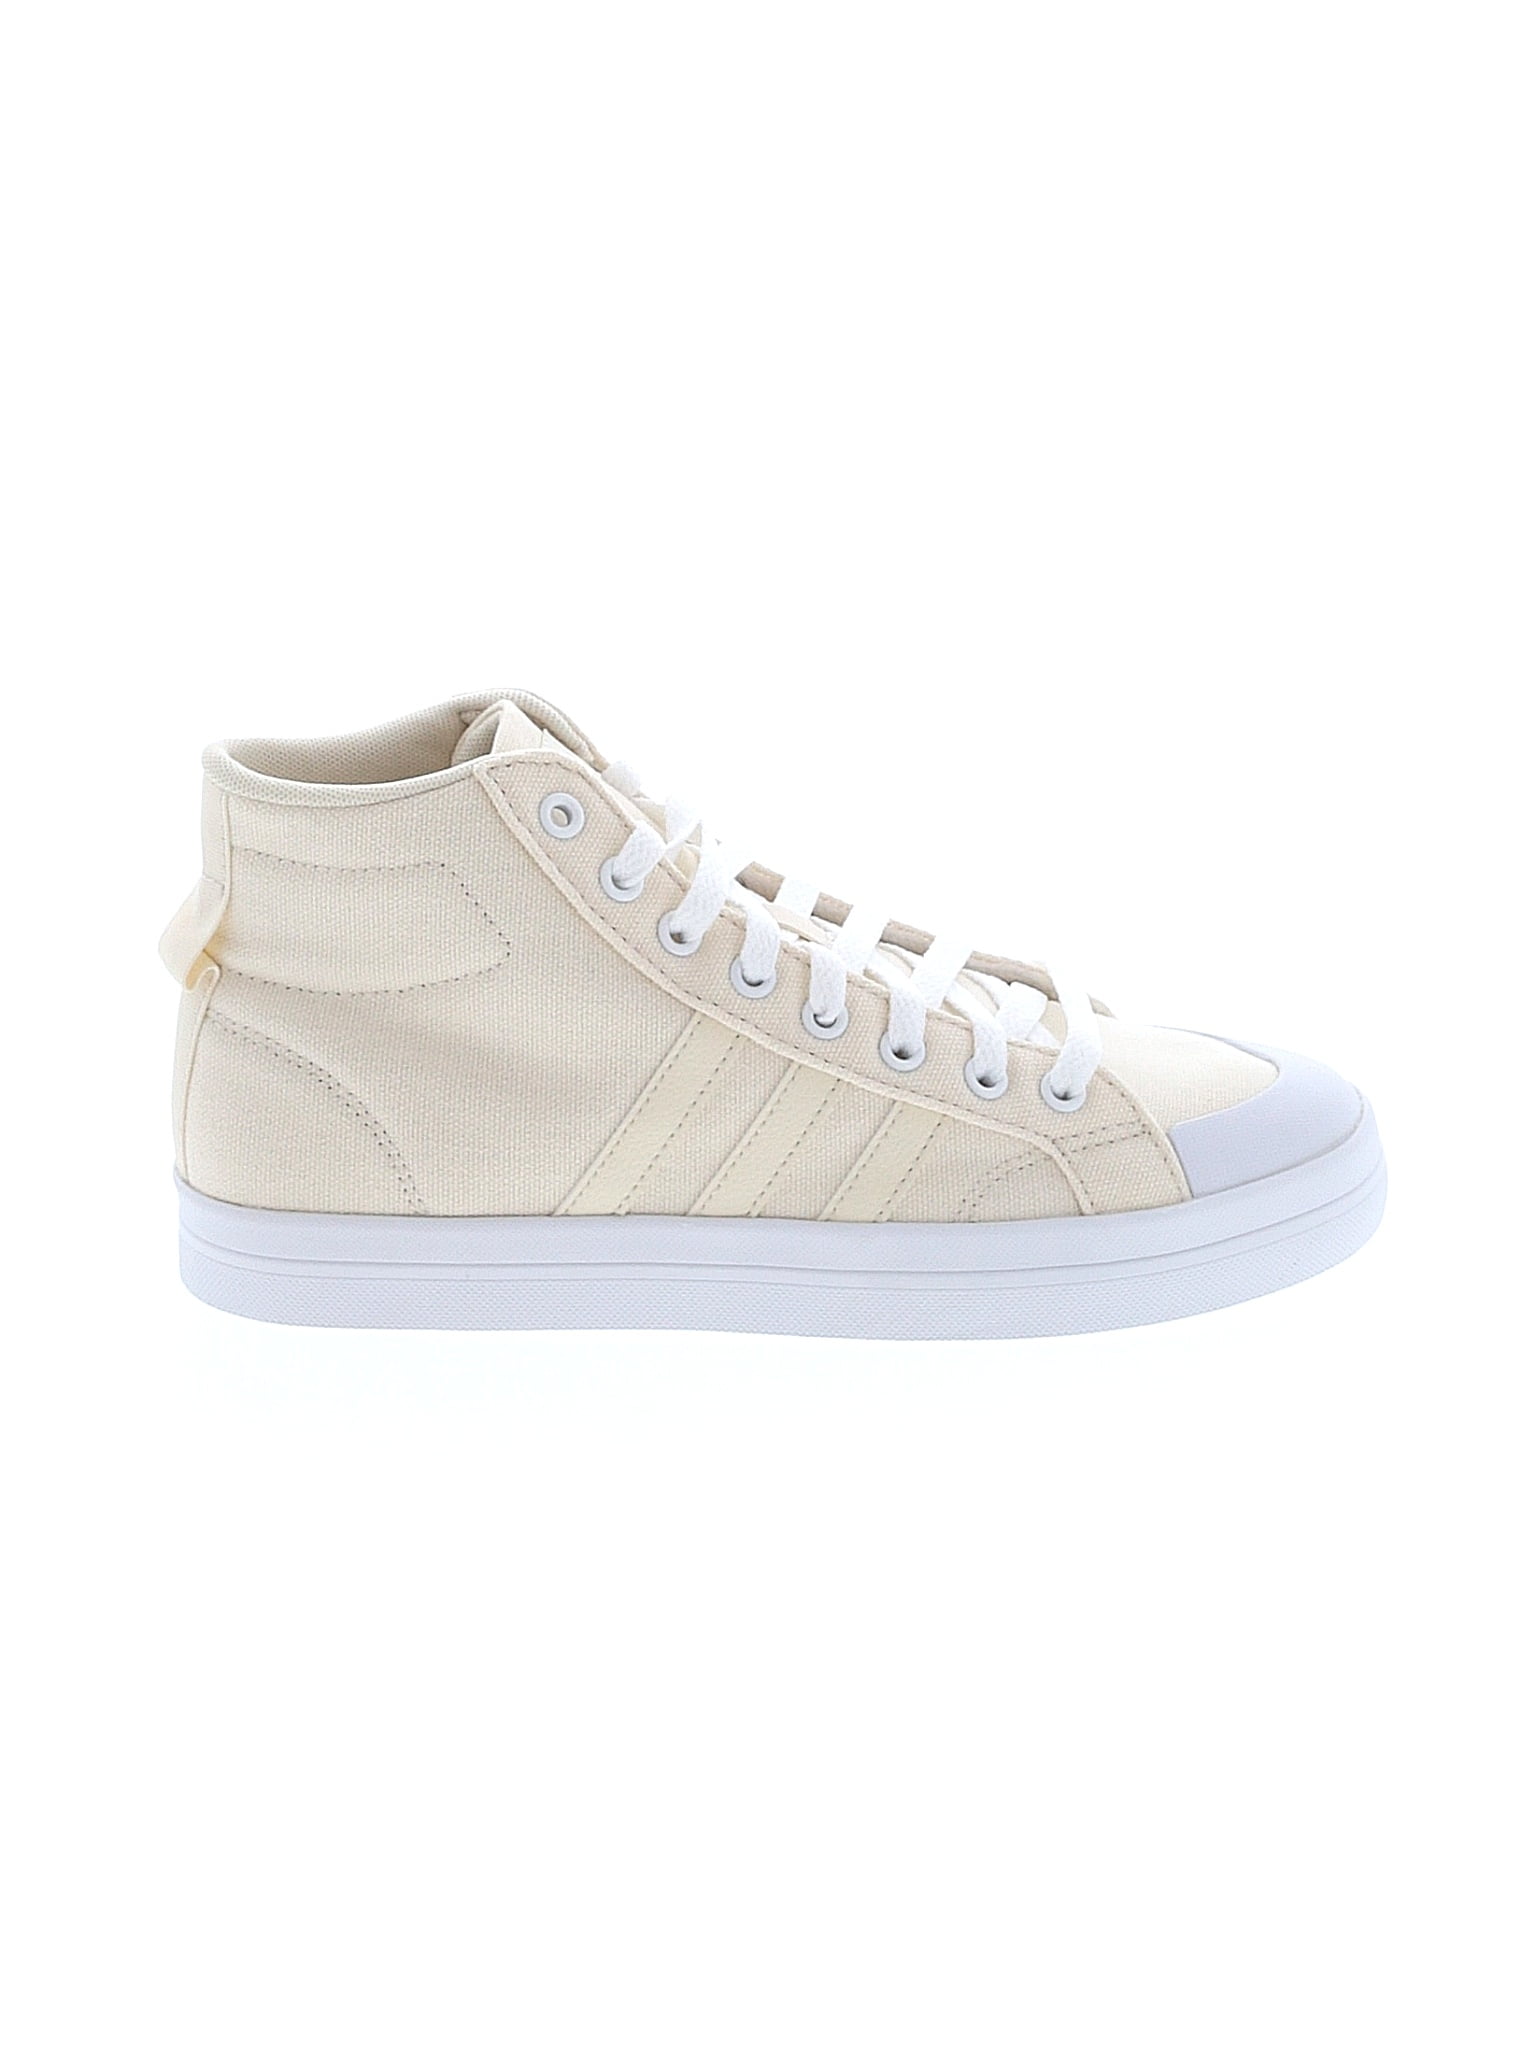 Adidas Ivory Sneakers Size 7 - 49% off | thredUP